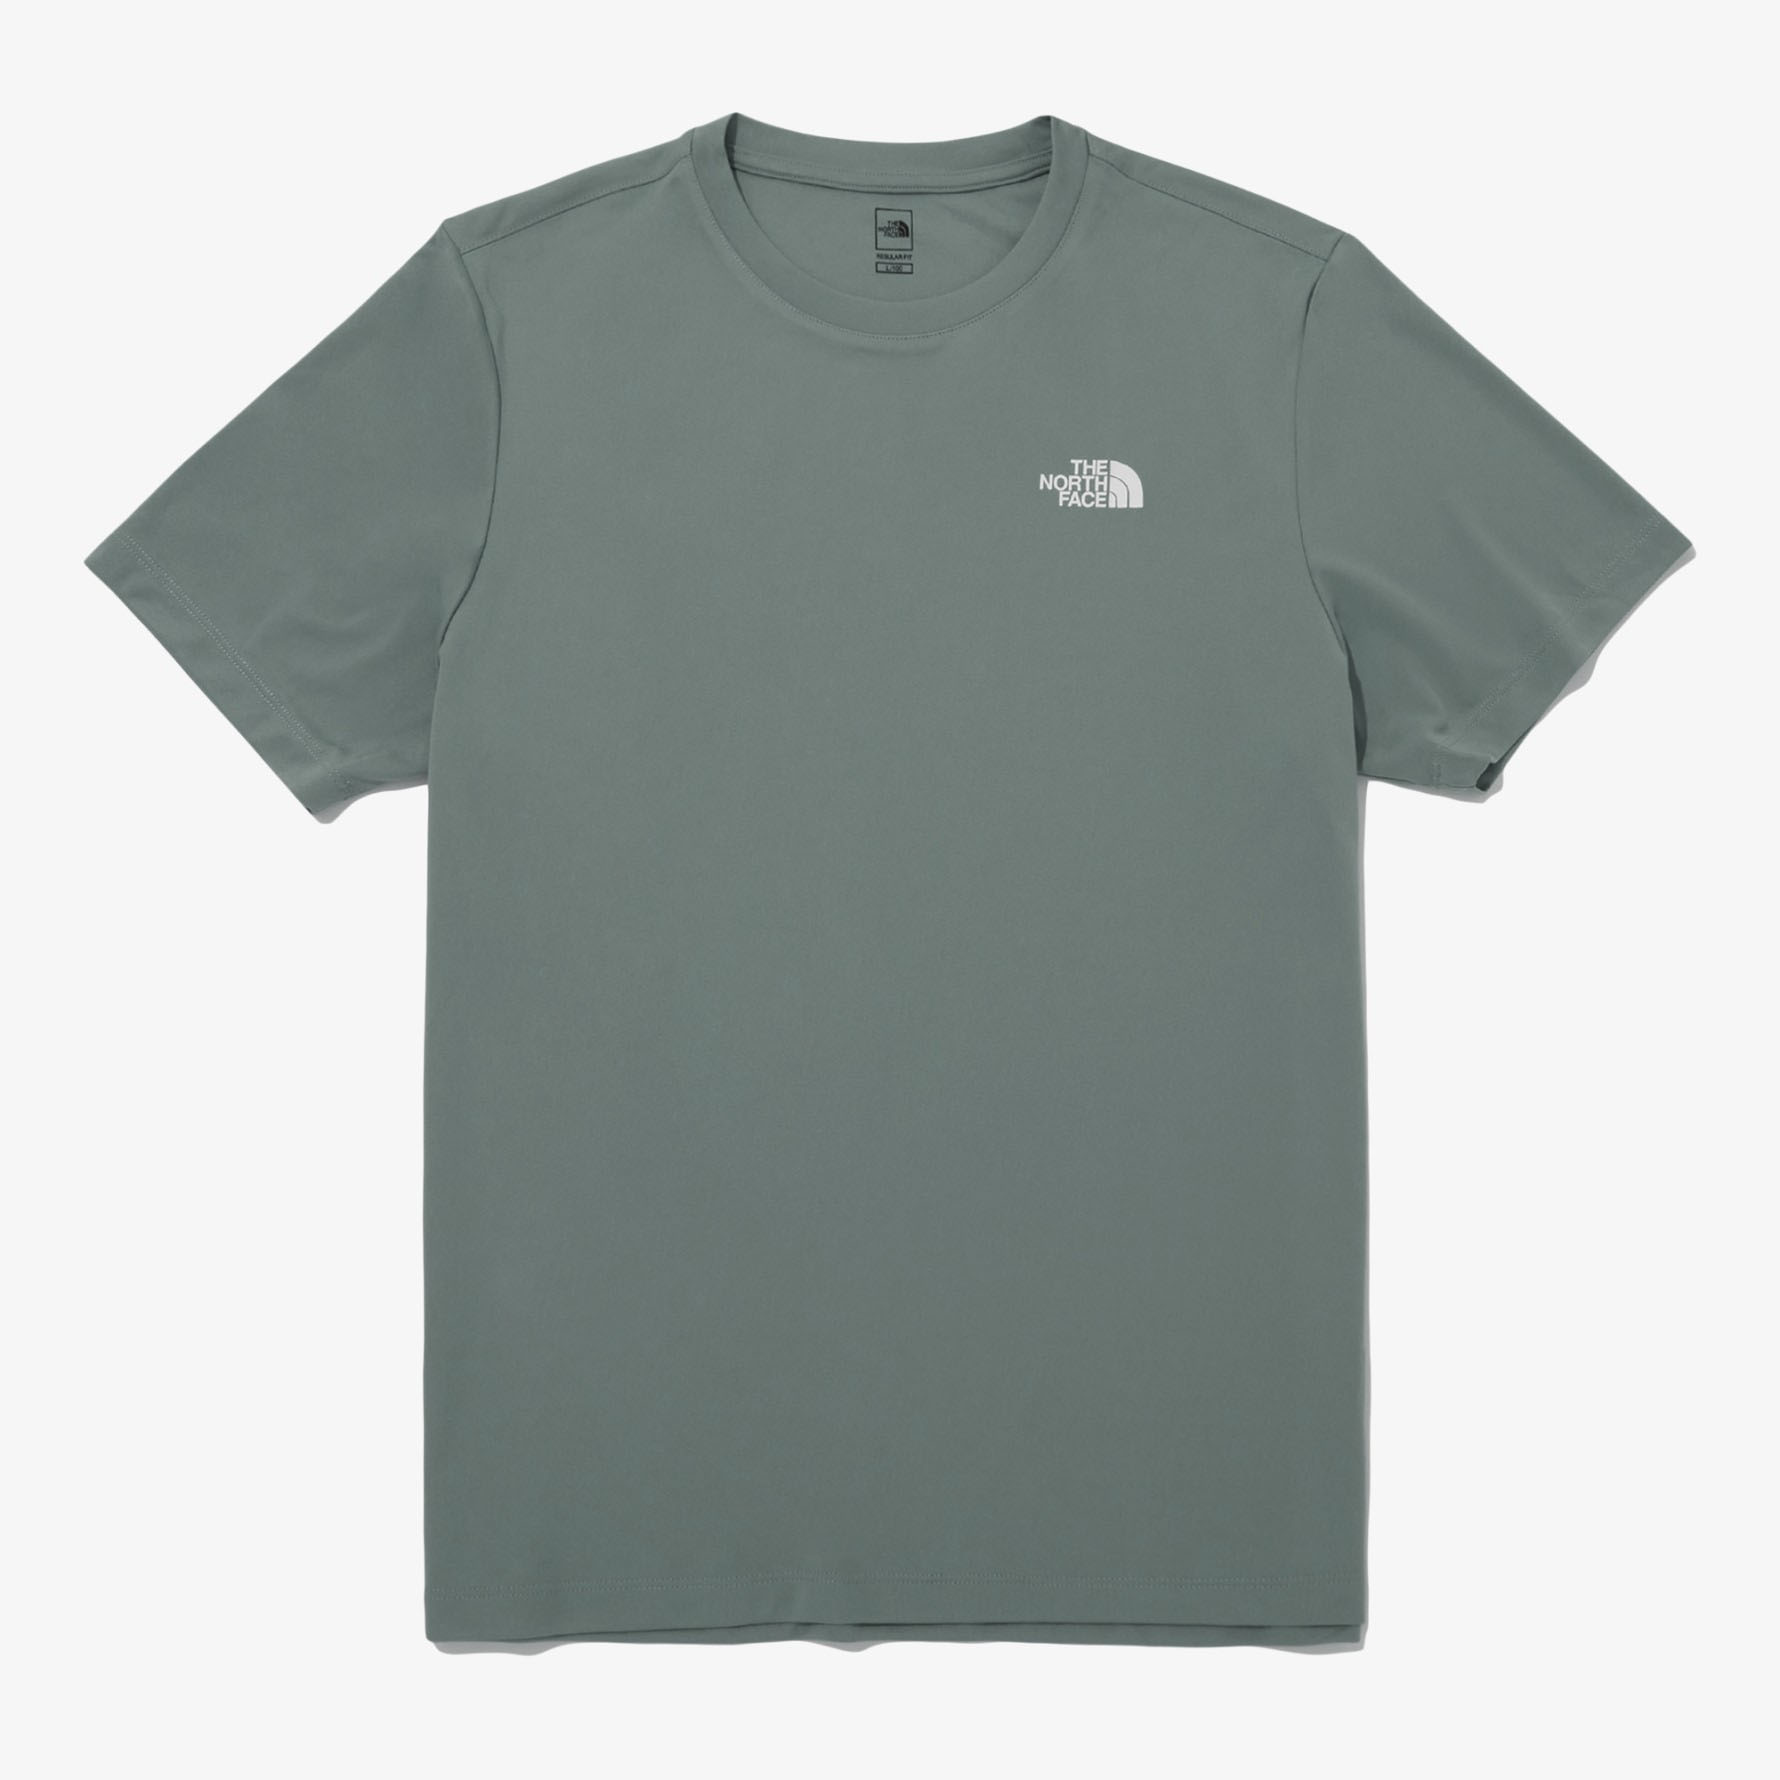 THE NORTH FACE Tシャツ M'S RECOVERY S/S R/TEE リカバリー 半袖Tシャツ ロゴT ベーシックフィット NAVY KHAKI CHARCOAL BLUE BLACK 半袖 NT7UQ06A/B/C/D/E｜a-dot｜03